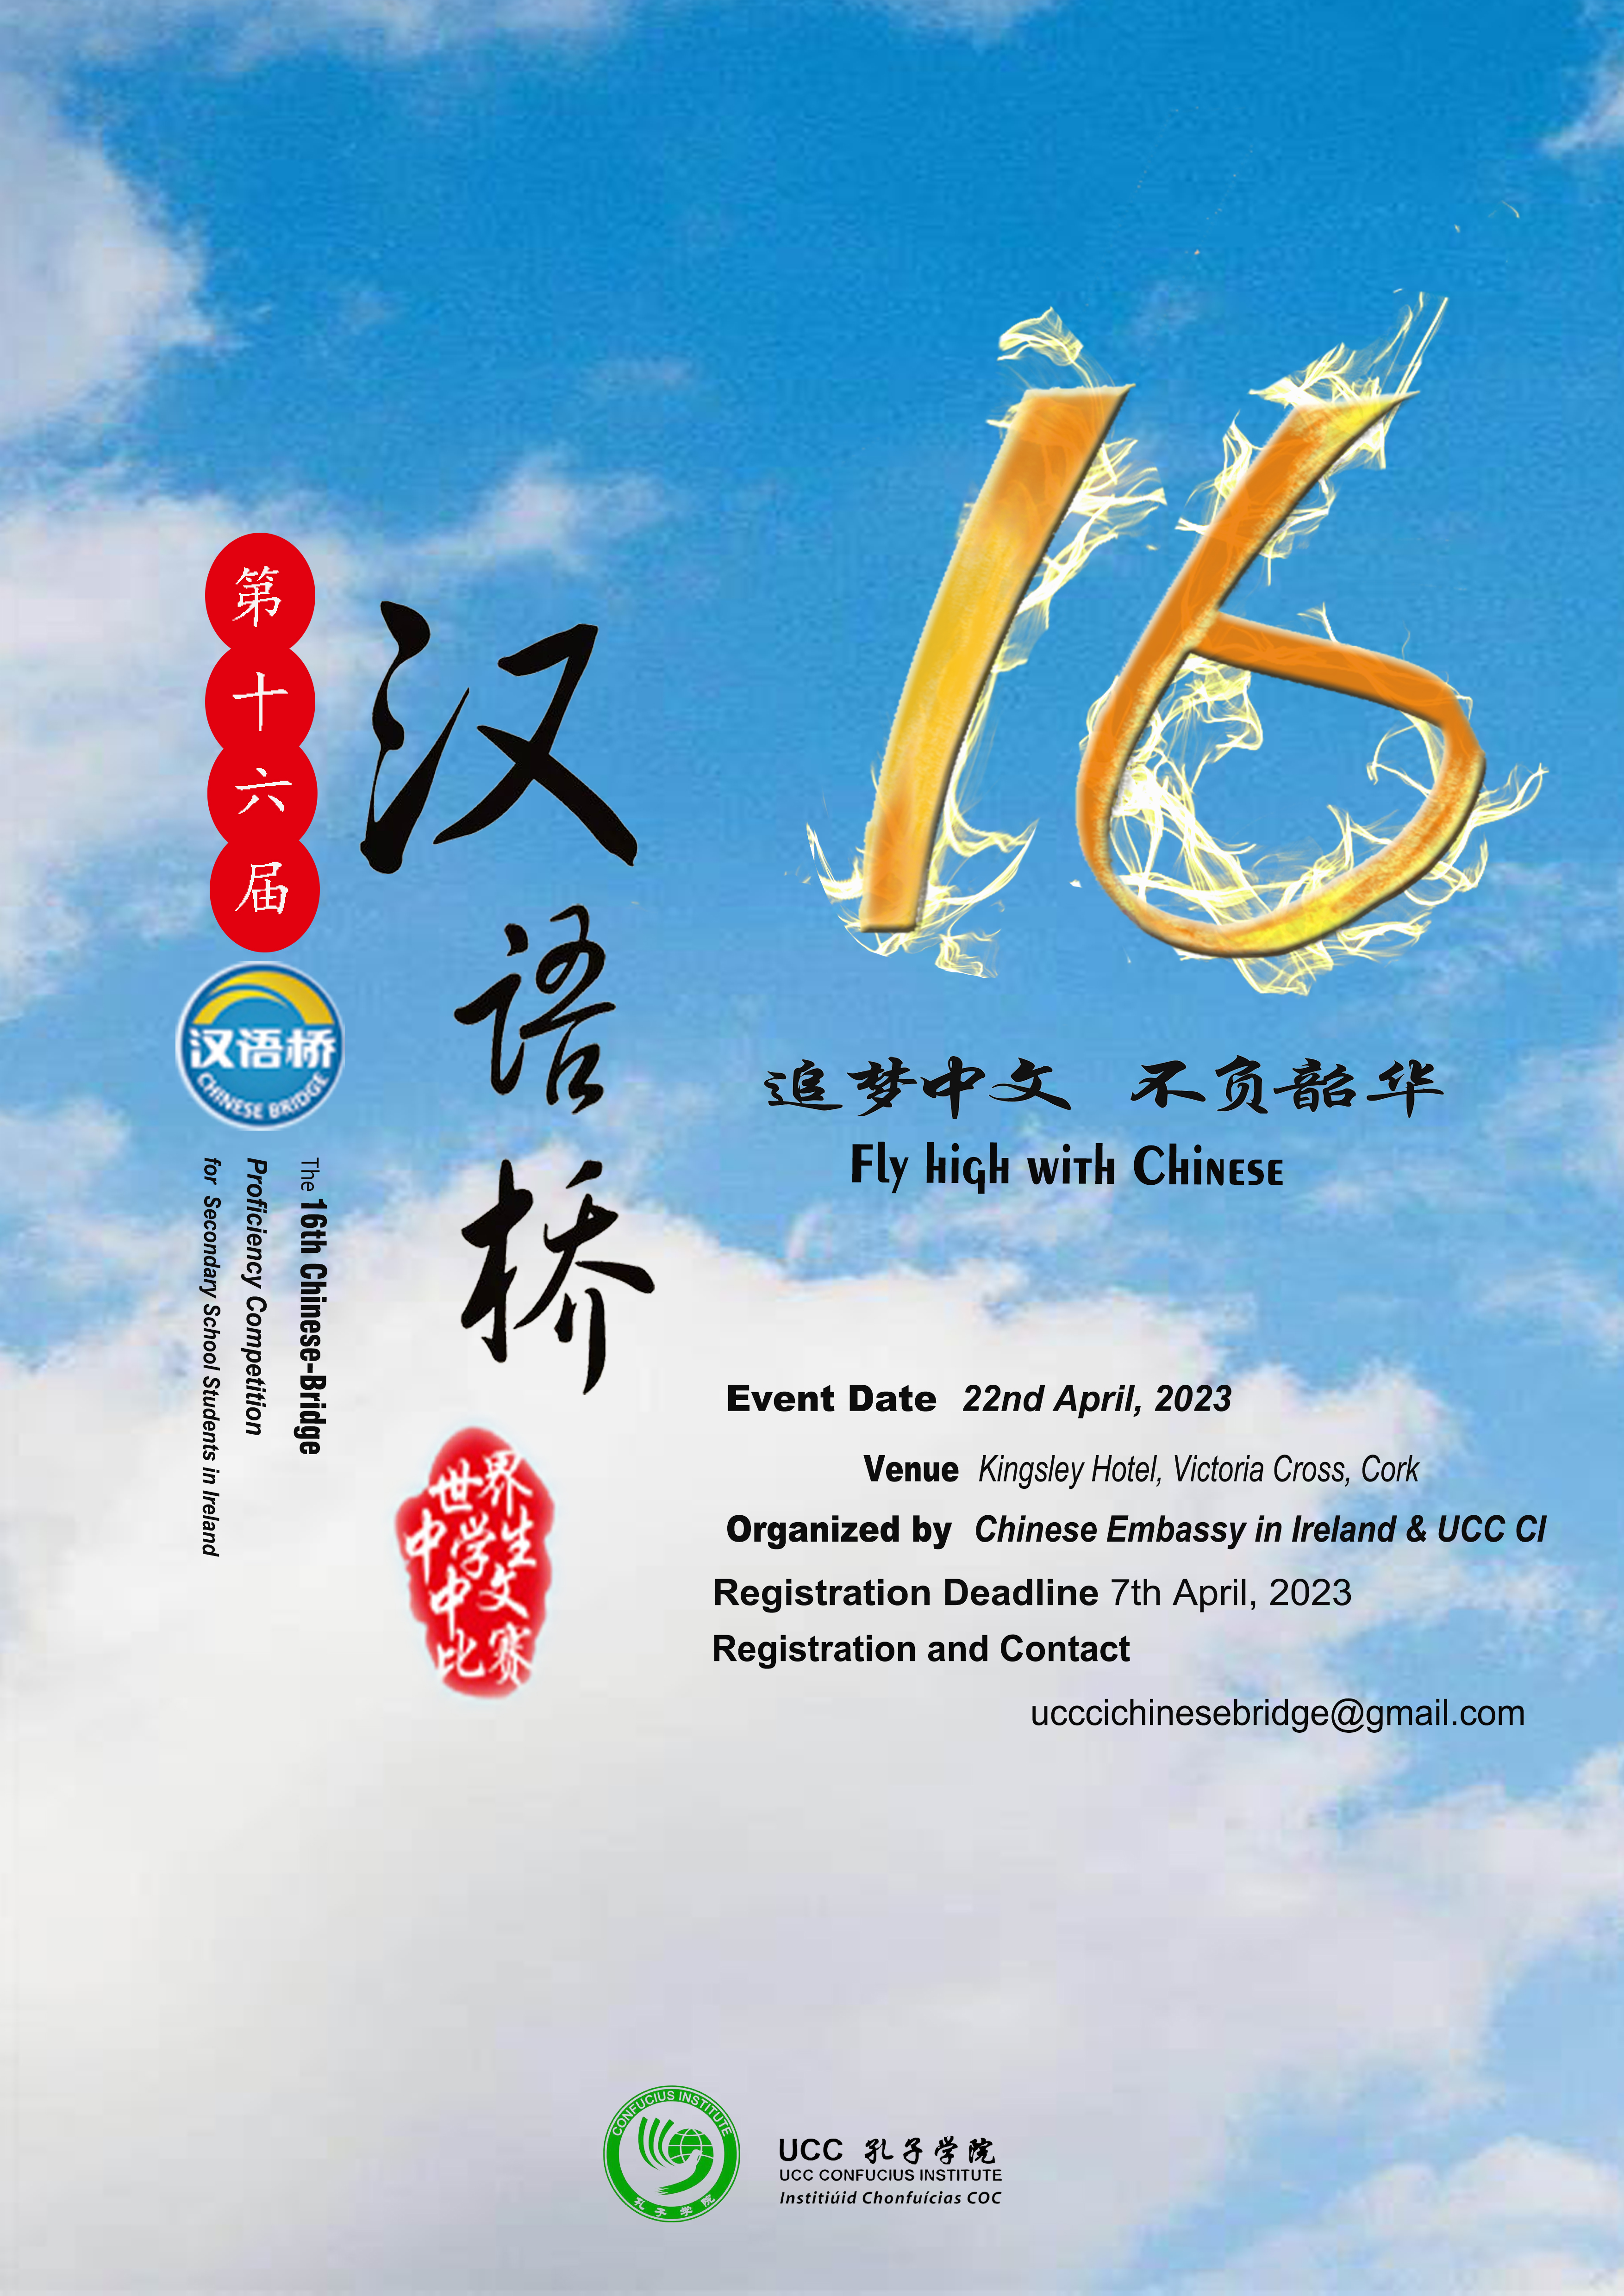 The 16th Chinese-Bridge Chinese Proficiency Competition for Secondary School Students in Ireland is open for registration now.